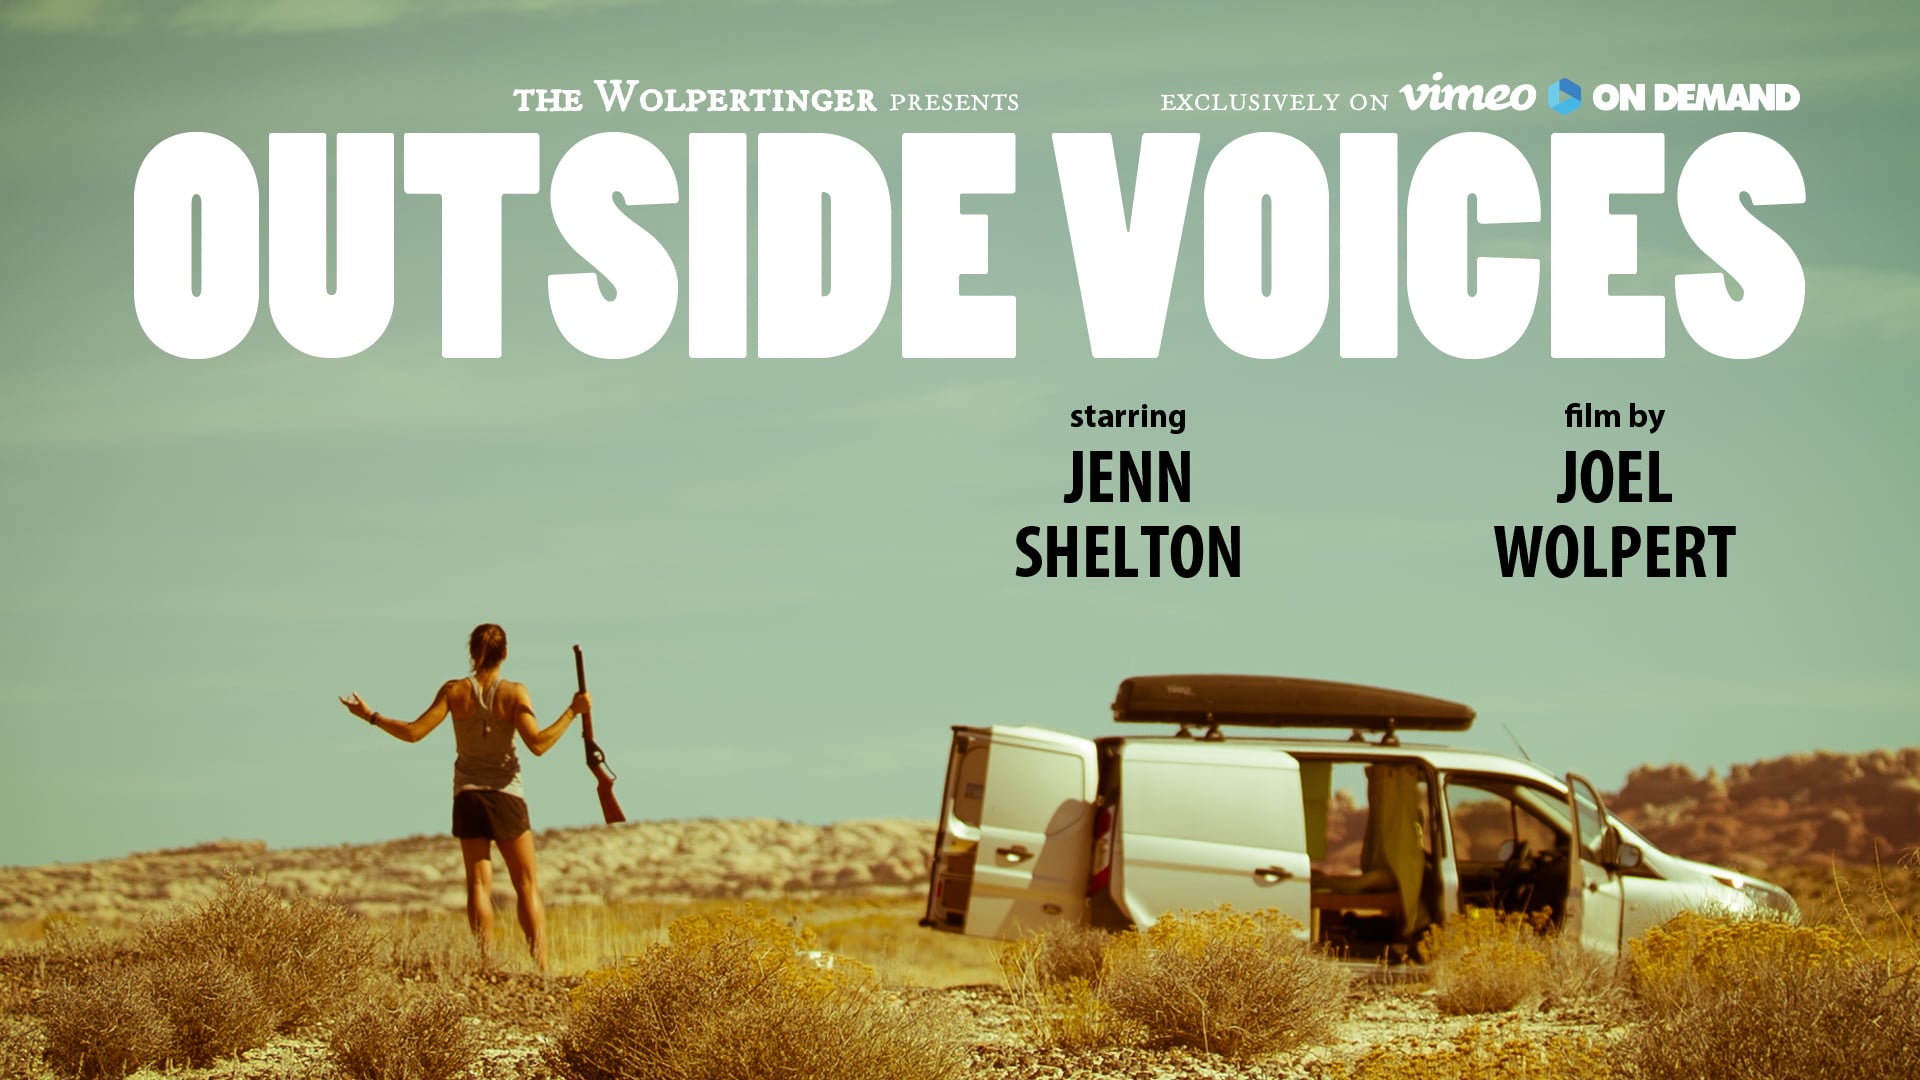 Watch OUTSIDE VOICES Online Vimeo On Demand on Vimeo